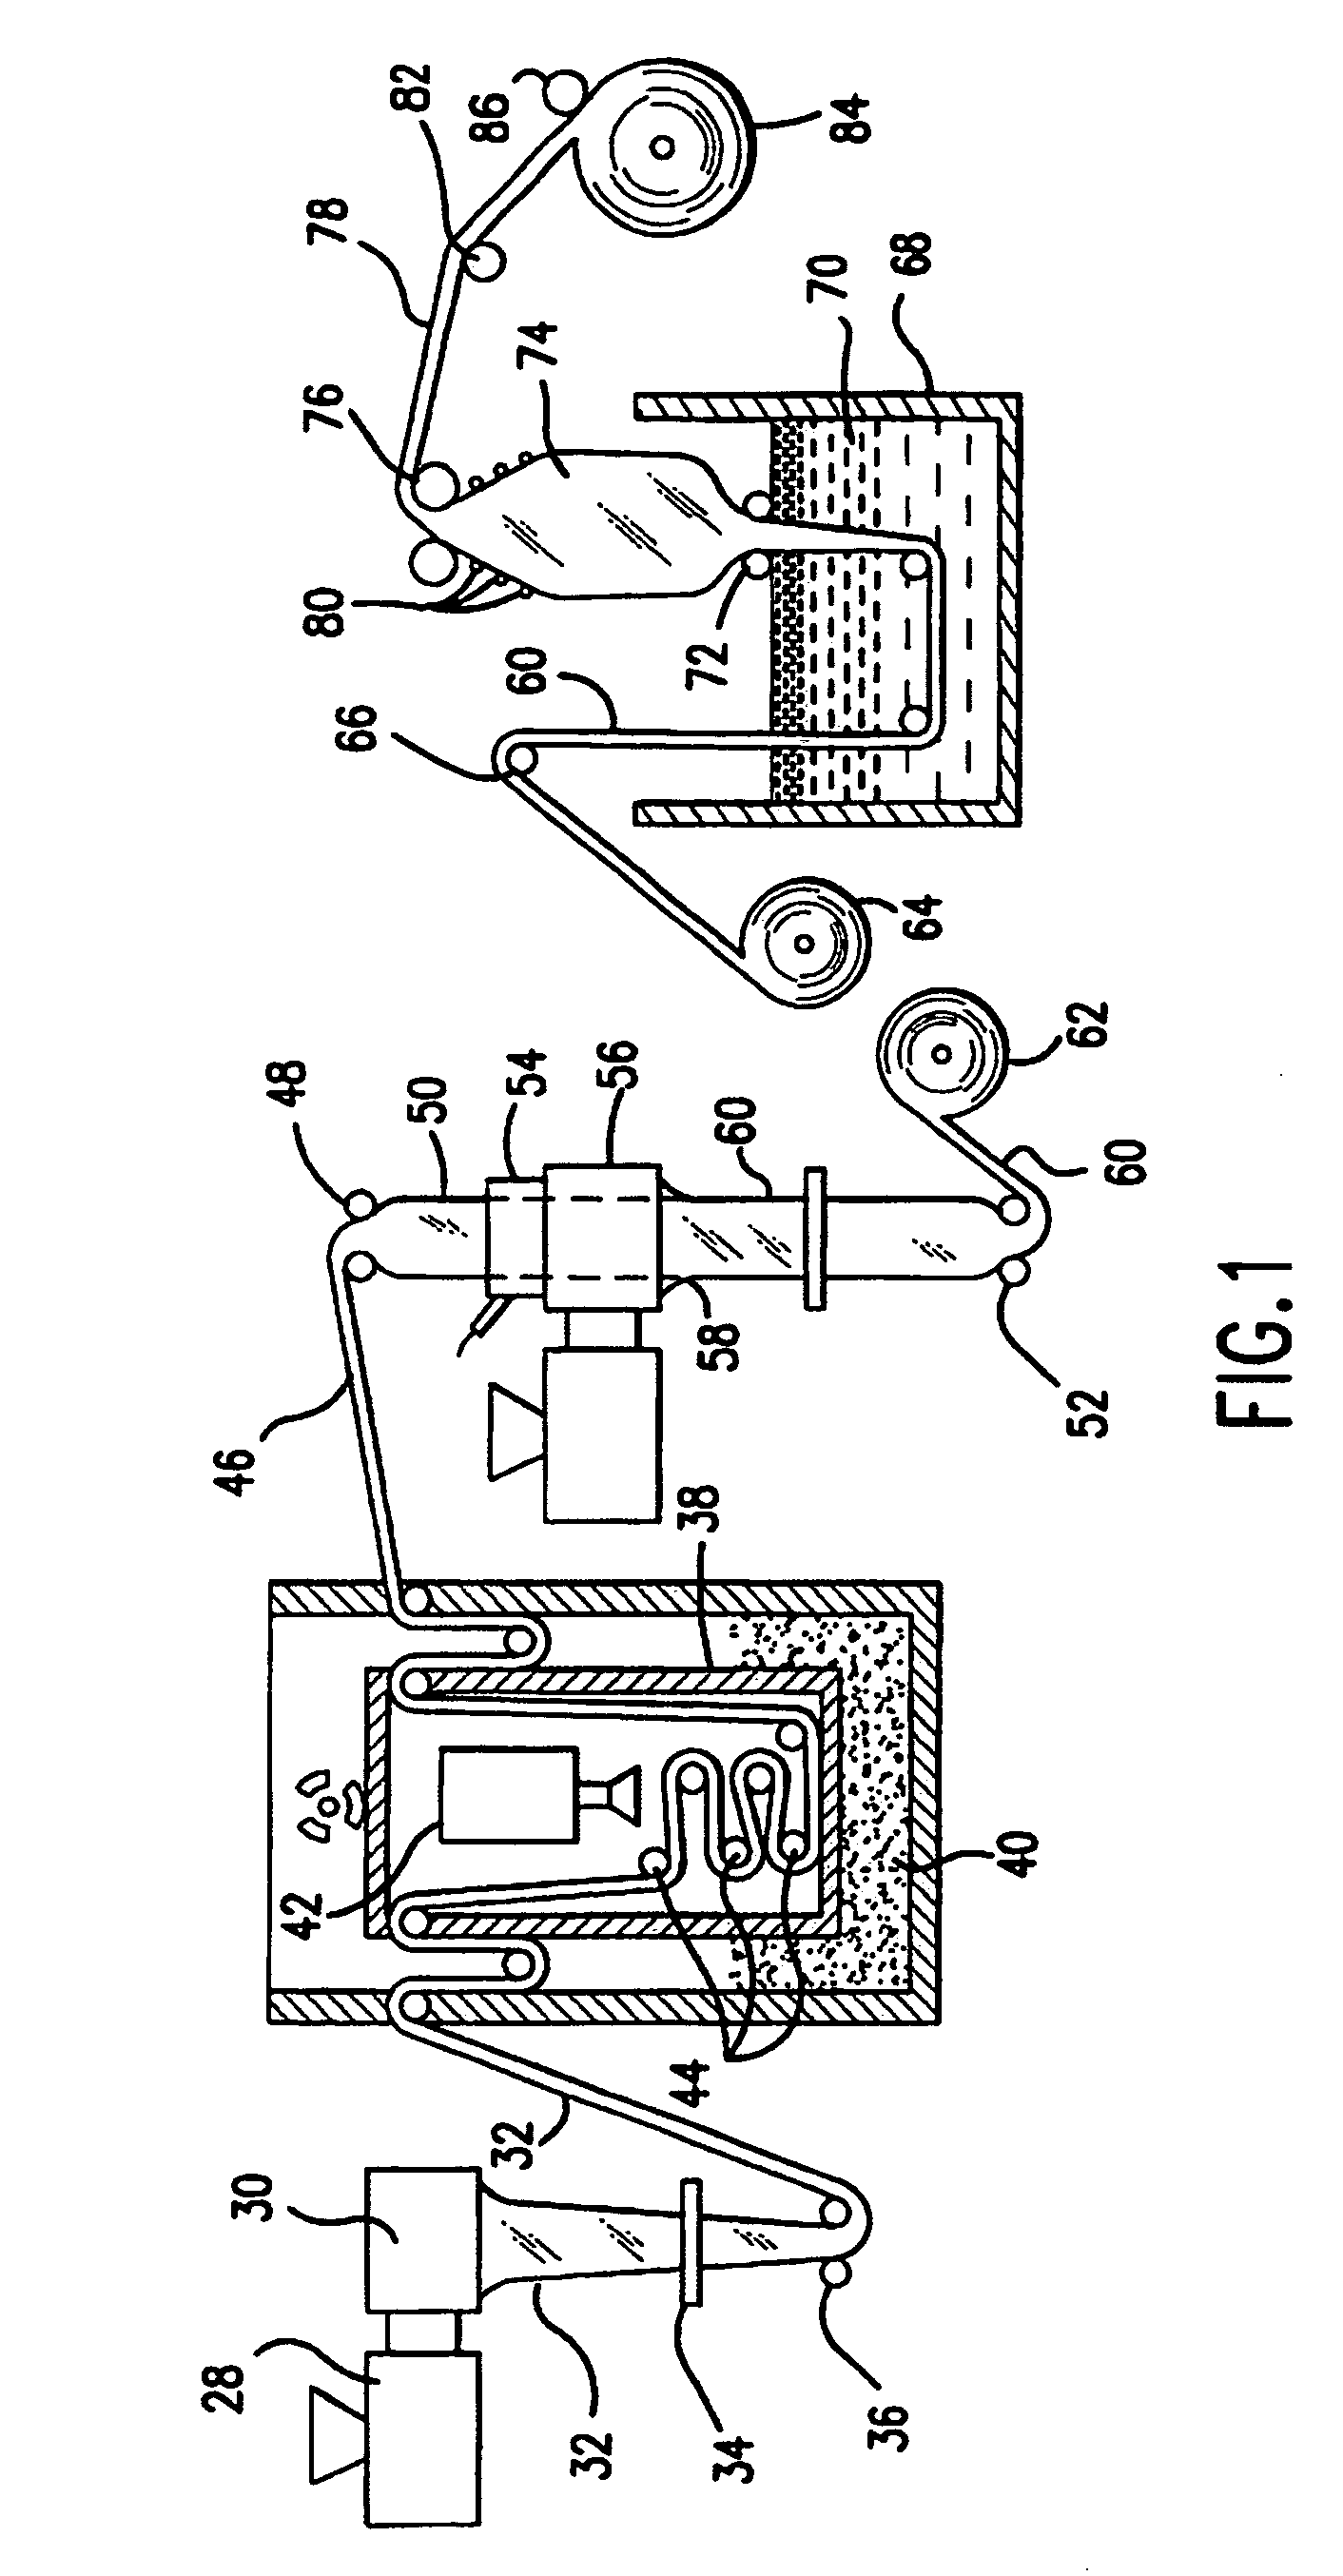 Vacuum packaging of a meat product using a film having a carbon dioxide scavenger